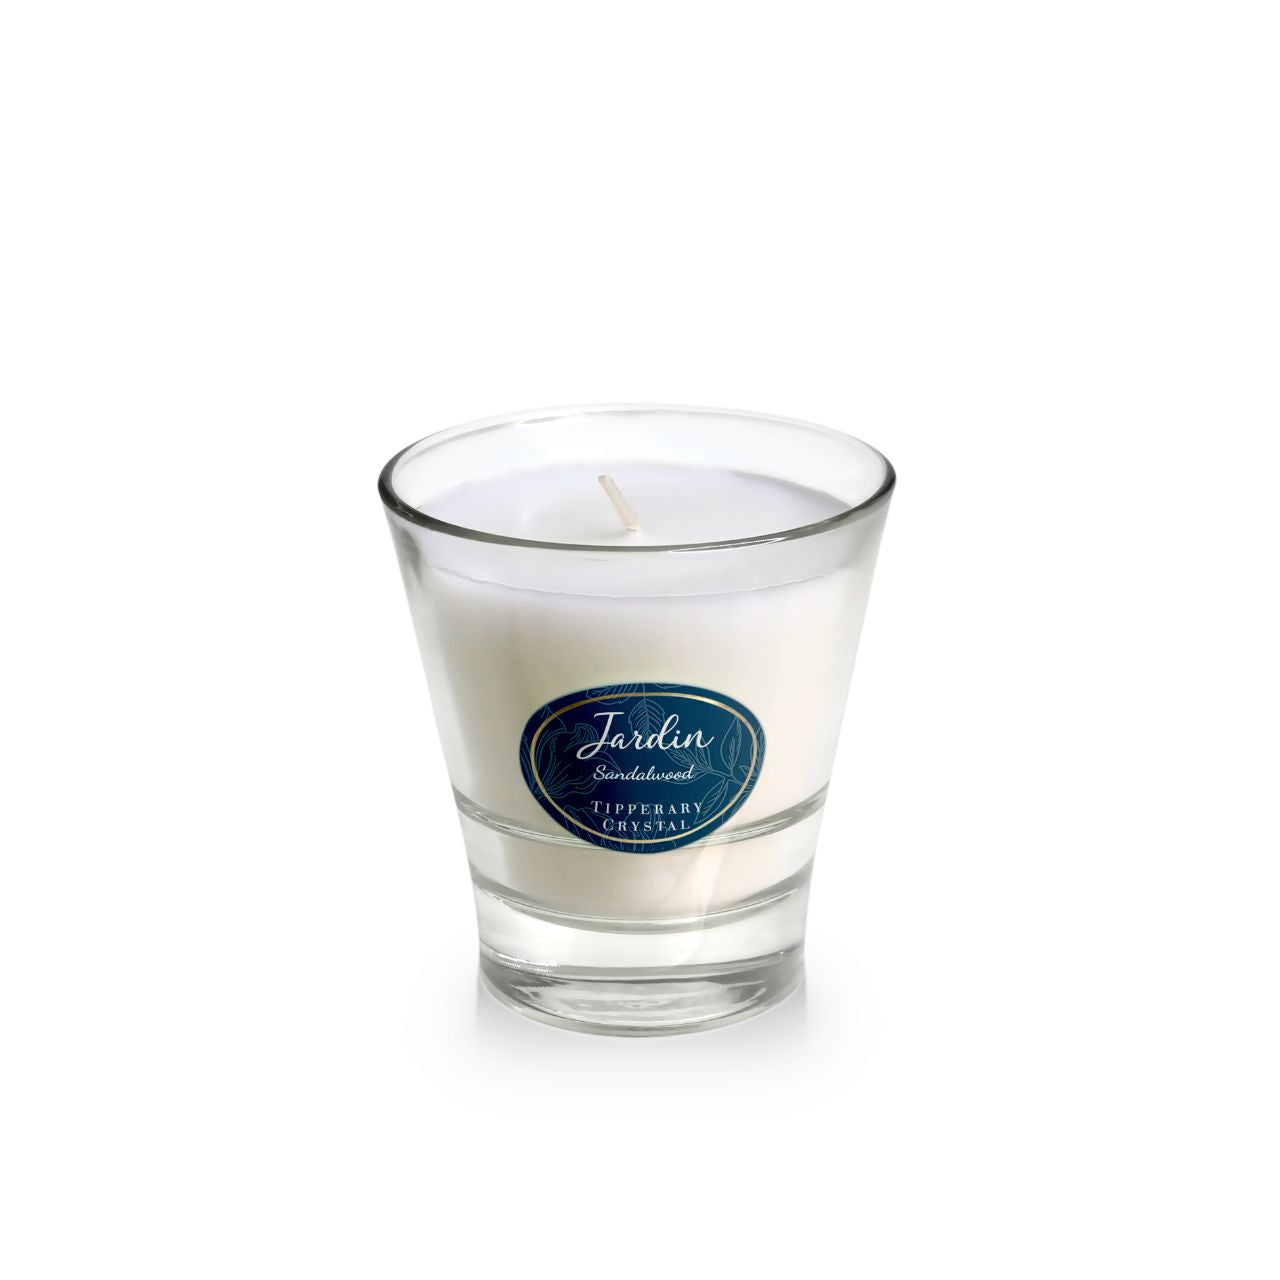 Sandalwood - Jardin Collection Candle by Tipperary  This is a luxuriously rich and decadent scent that has blends of amber and musky sandalwood intertwined with smoked oak and exotic spices. A wonderful aroma that will create an opulent ambiance.